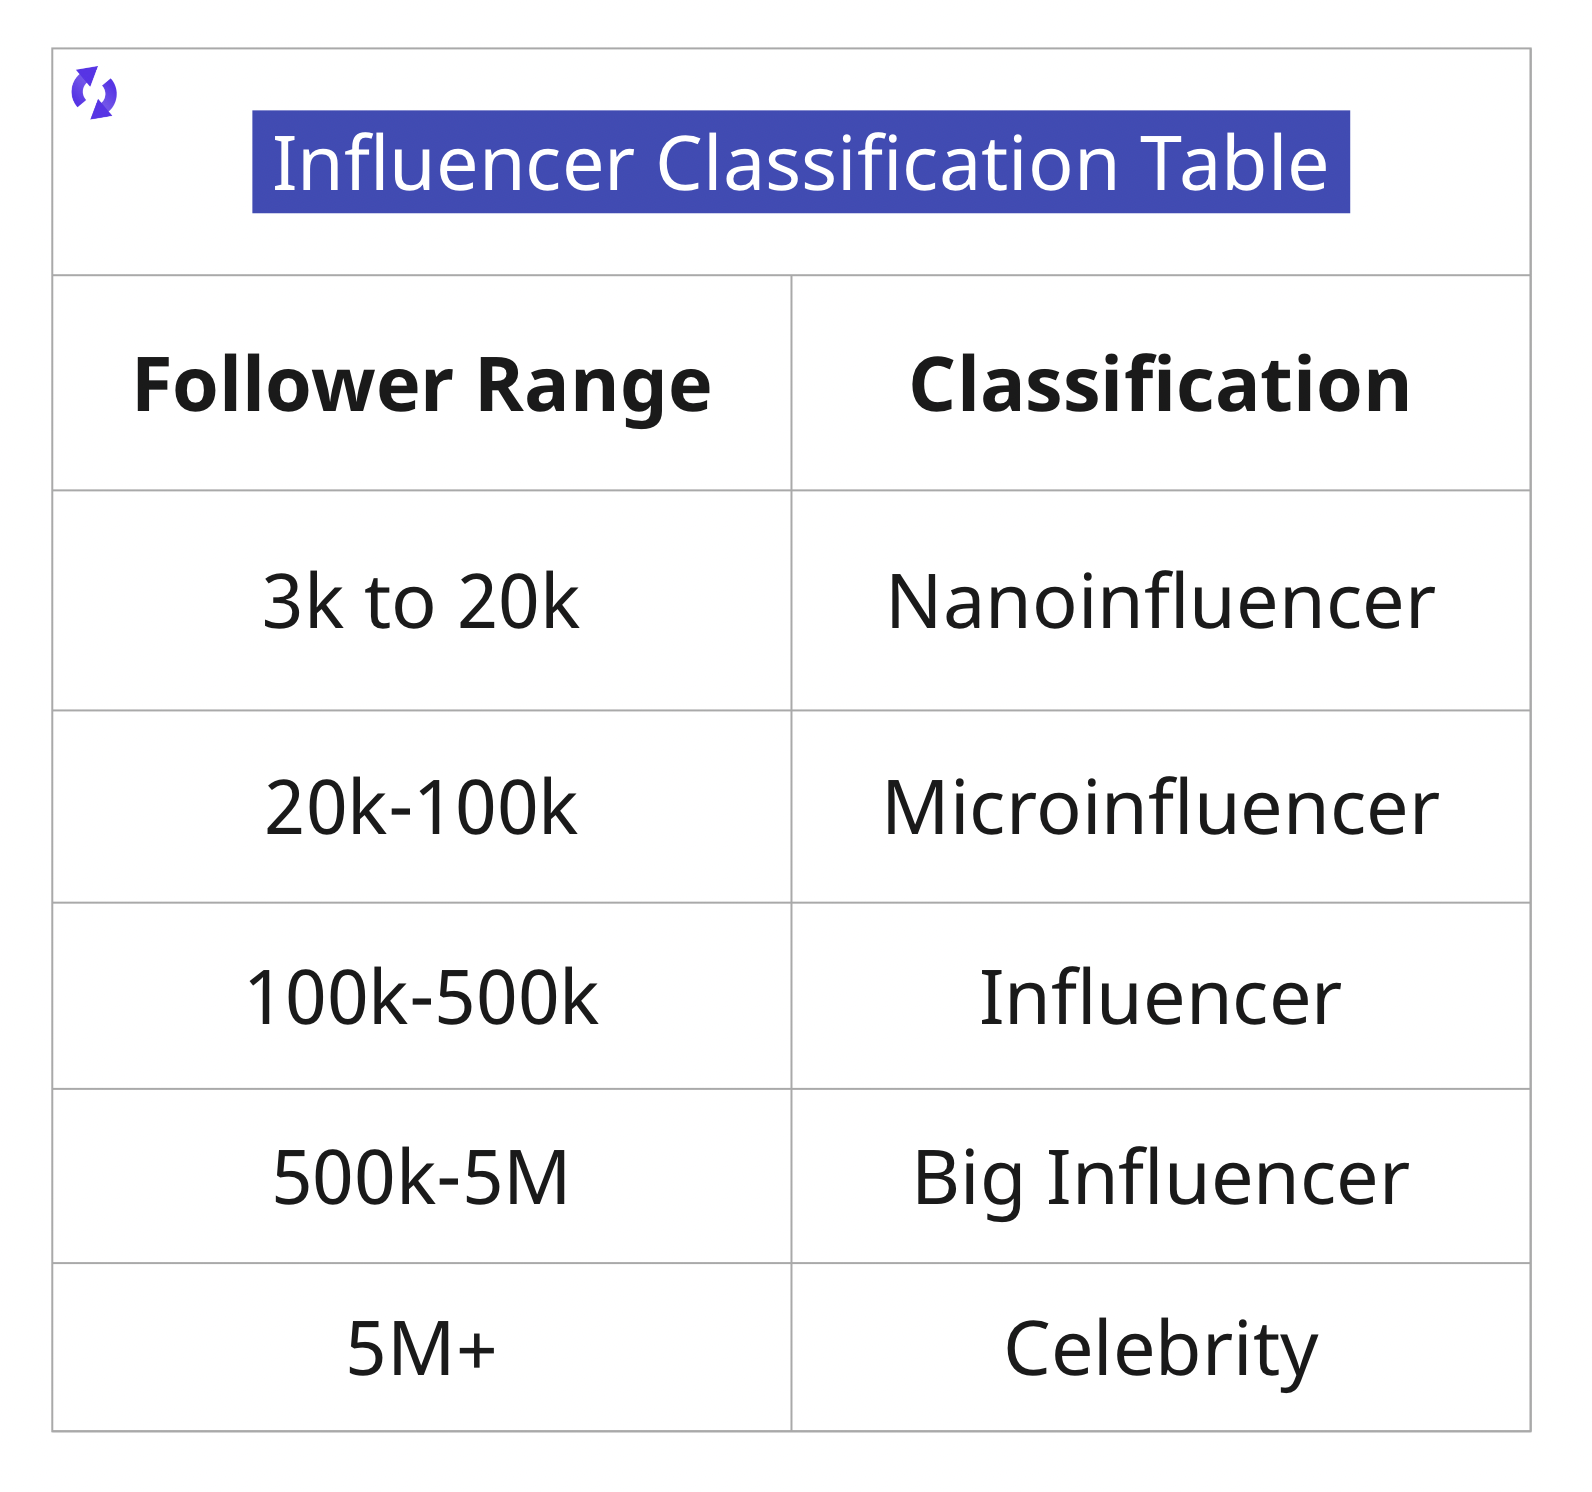 Why micro influencers are critical to your influencer program